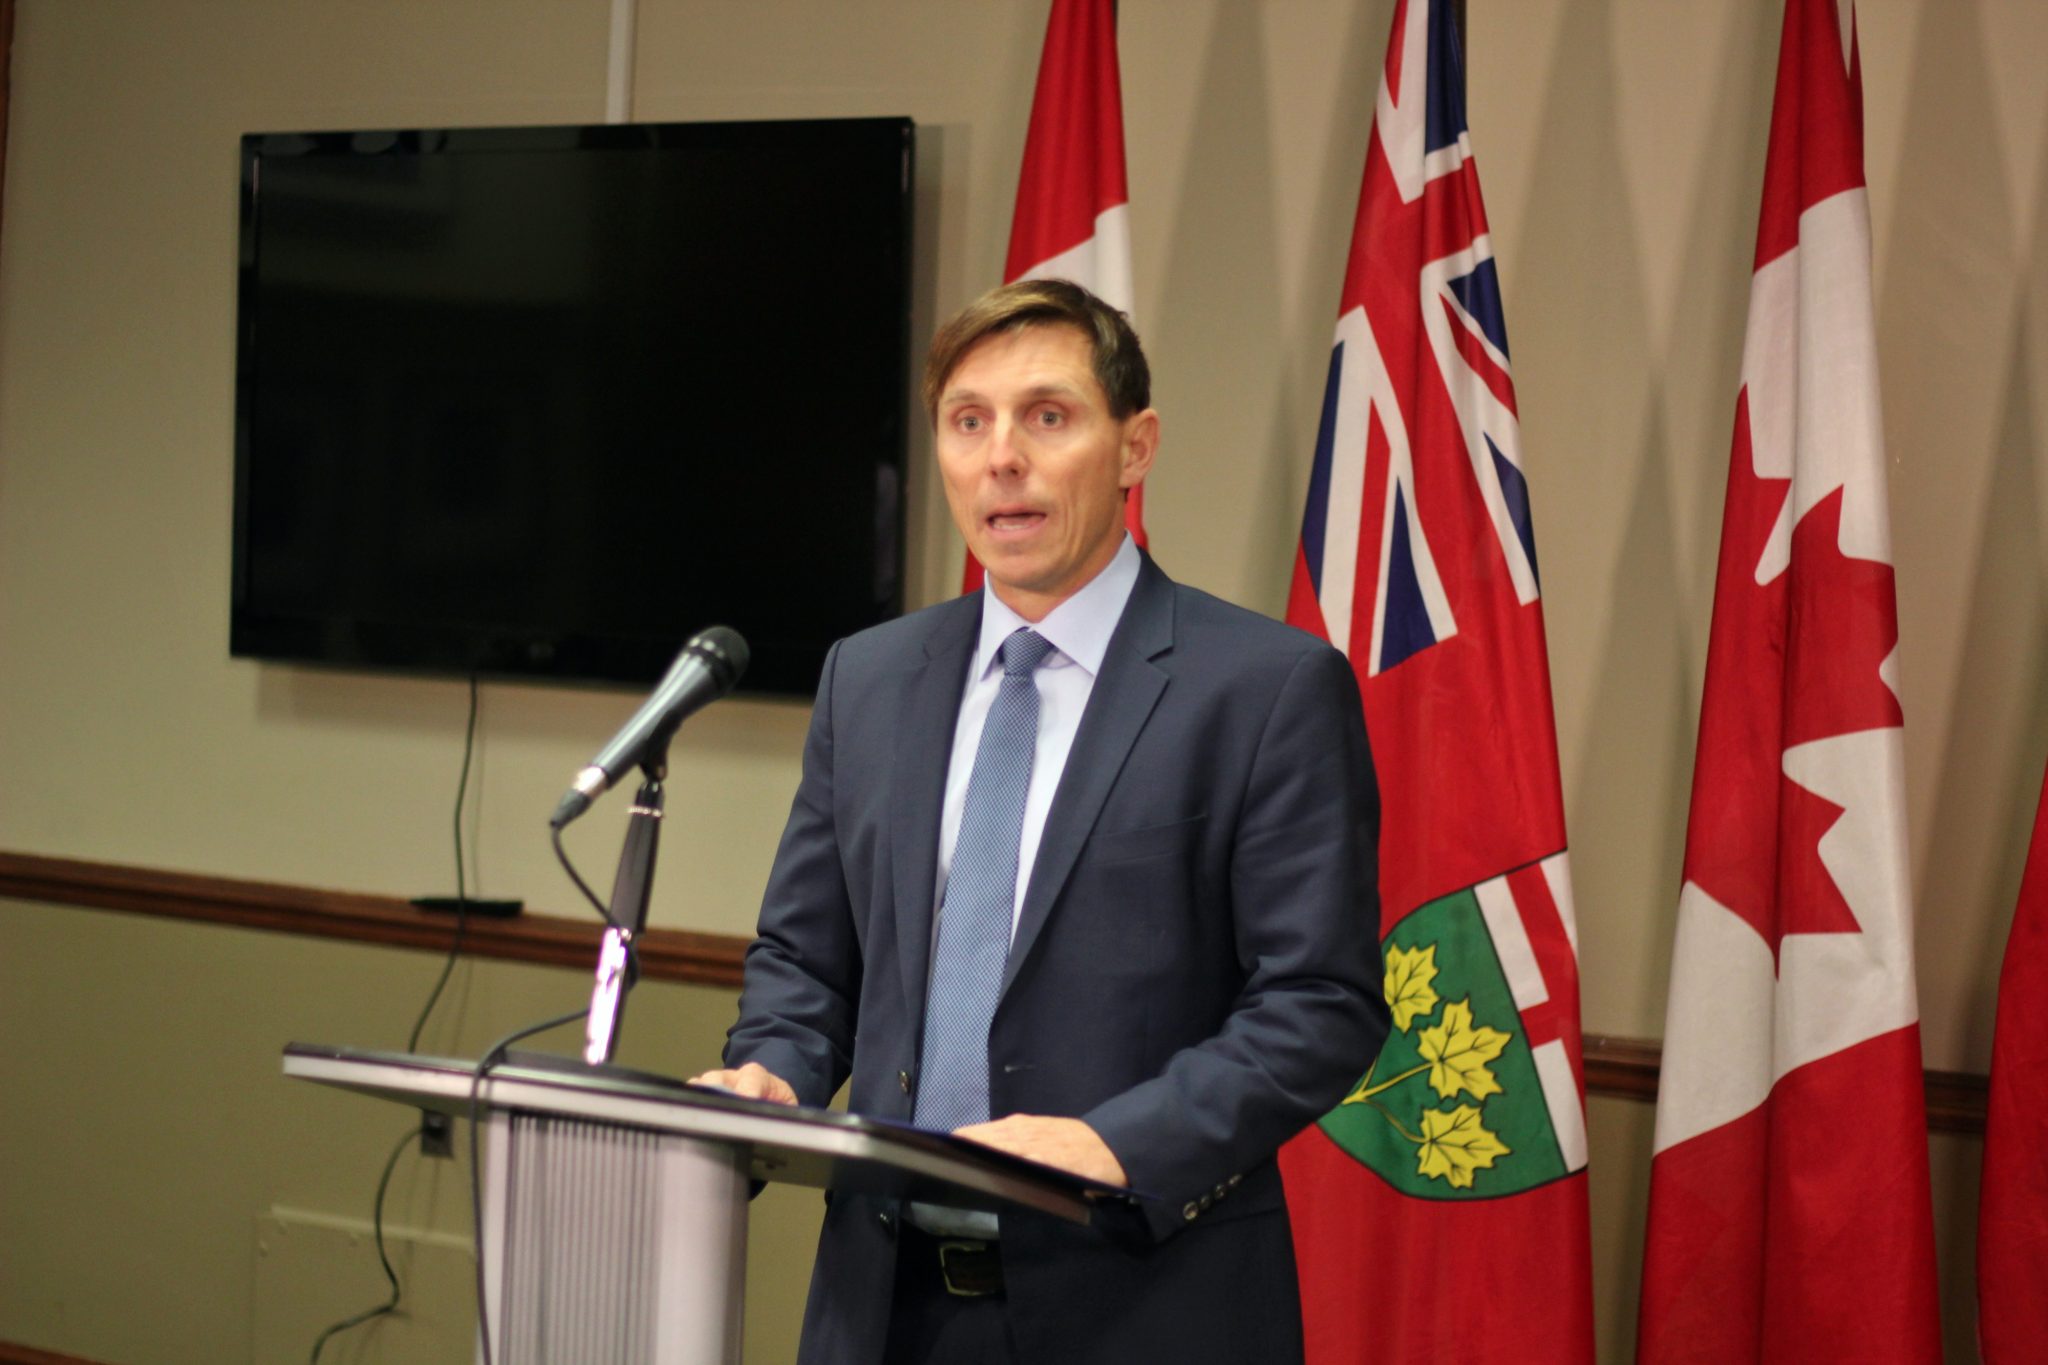 Patrick Brown joins PC leadership race, shaking up an already unprecedented process